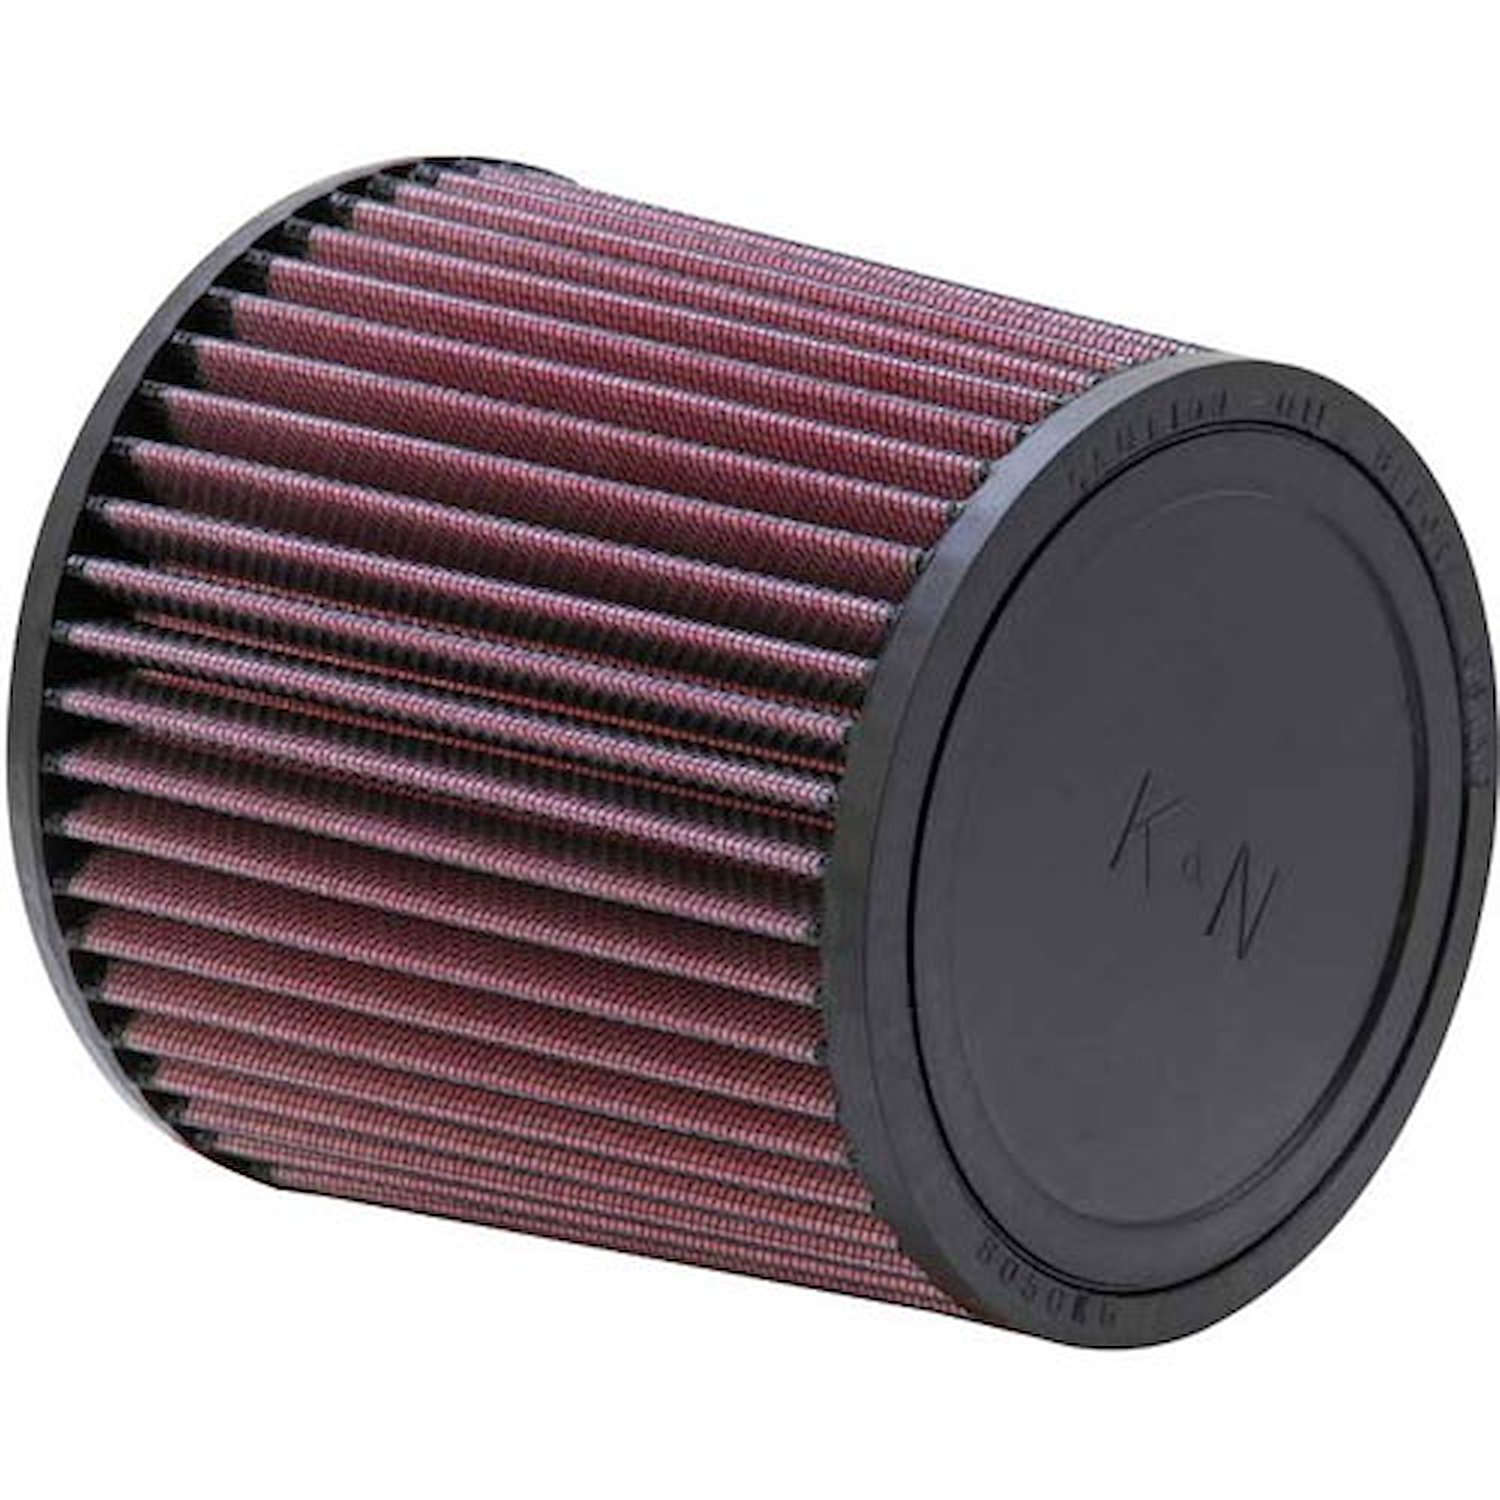 Tapered Filter Flange Dia.- F: 4.5" , 114 mm